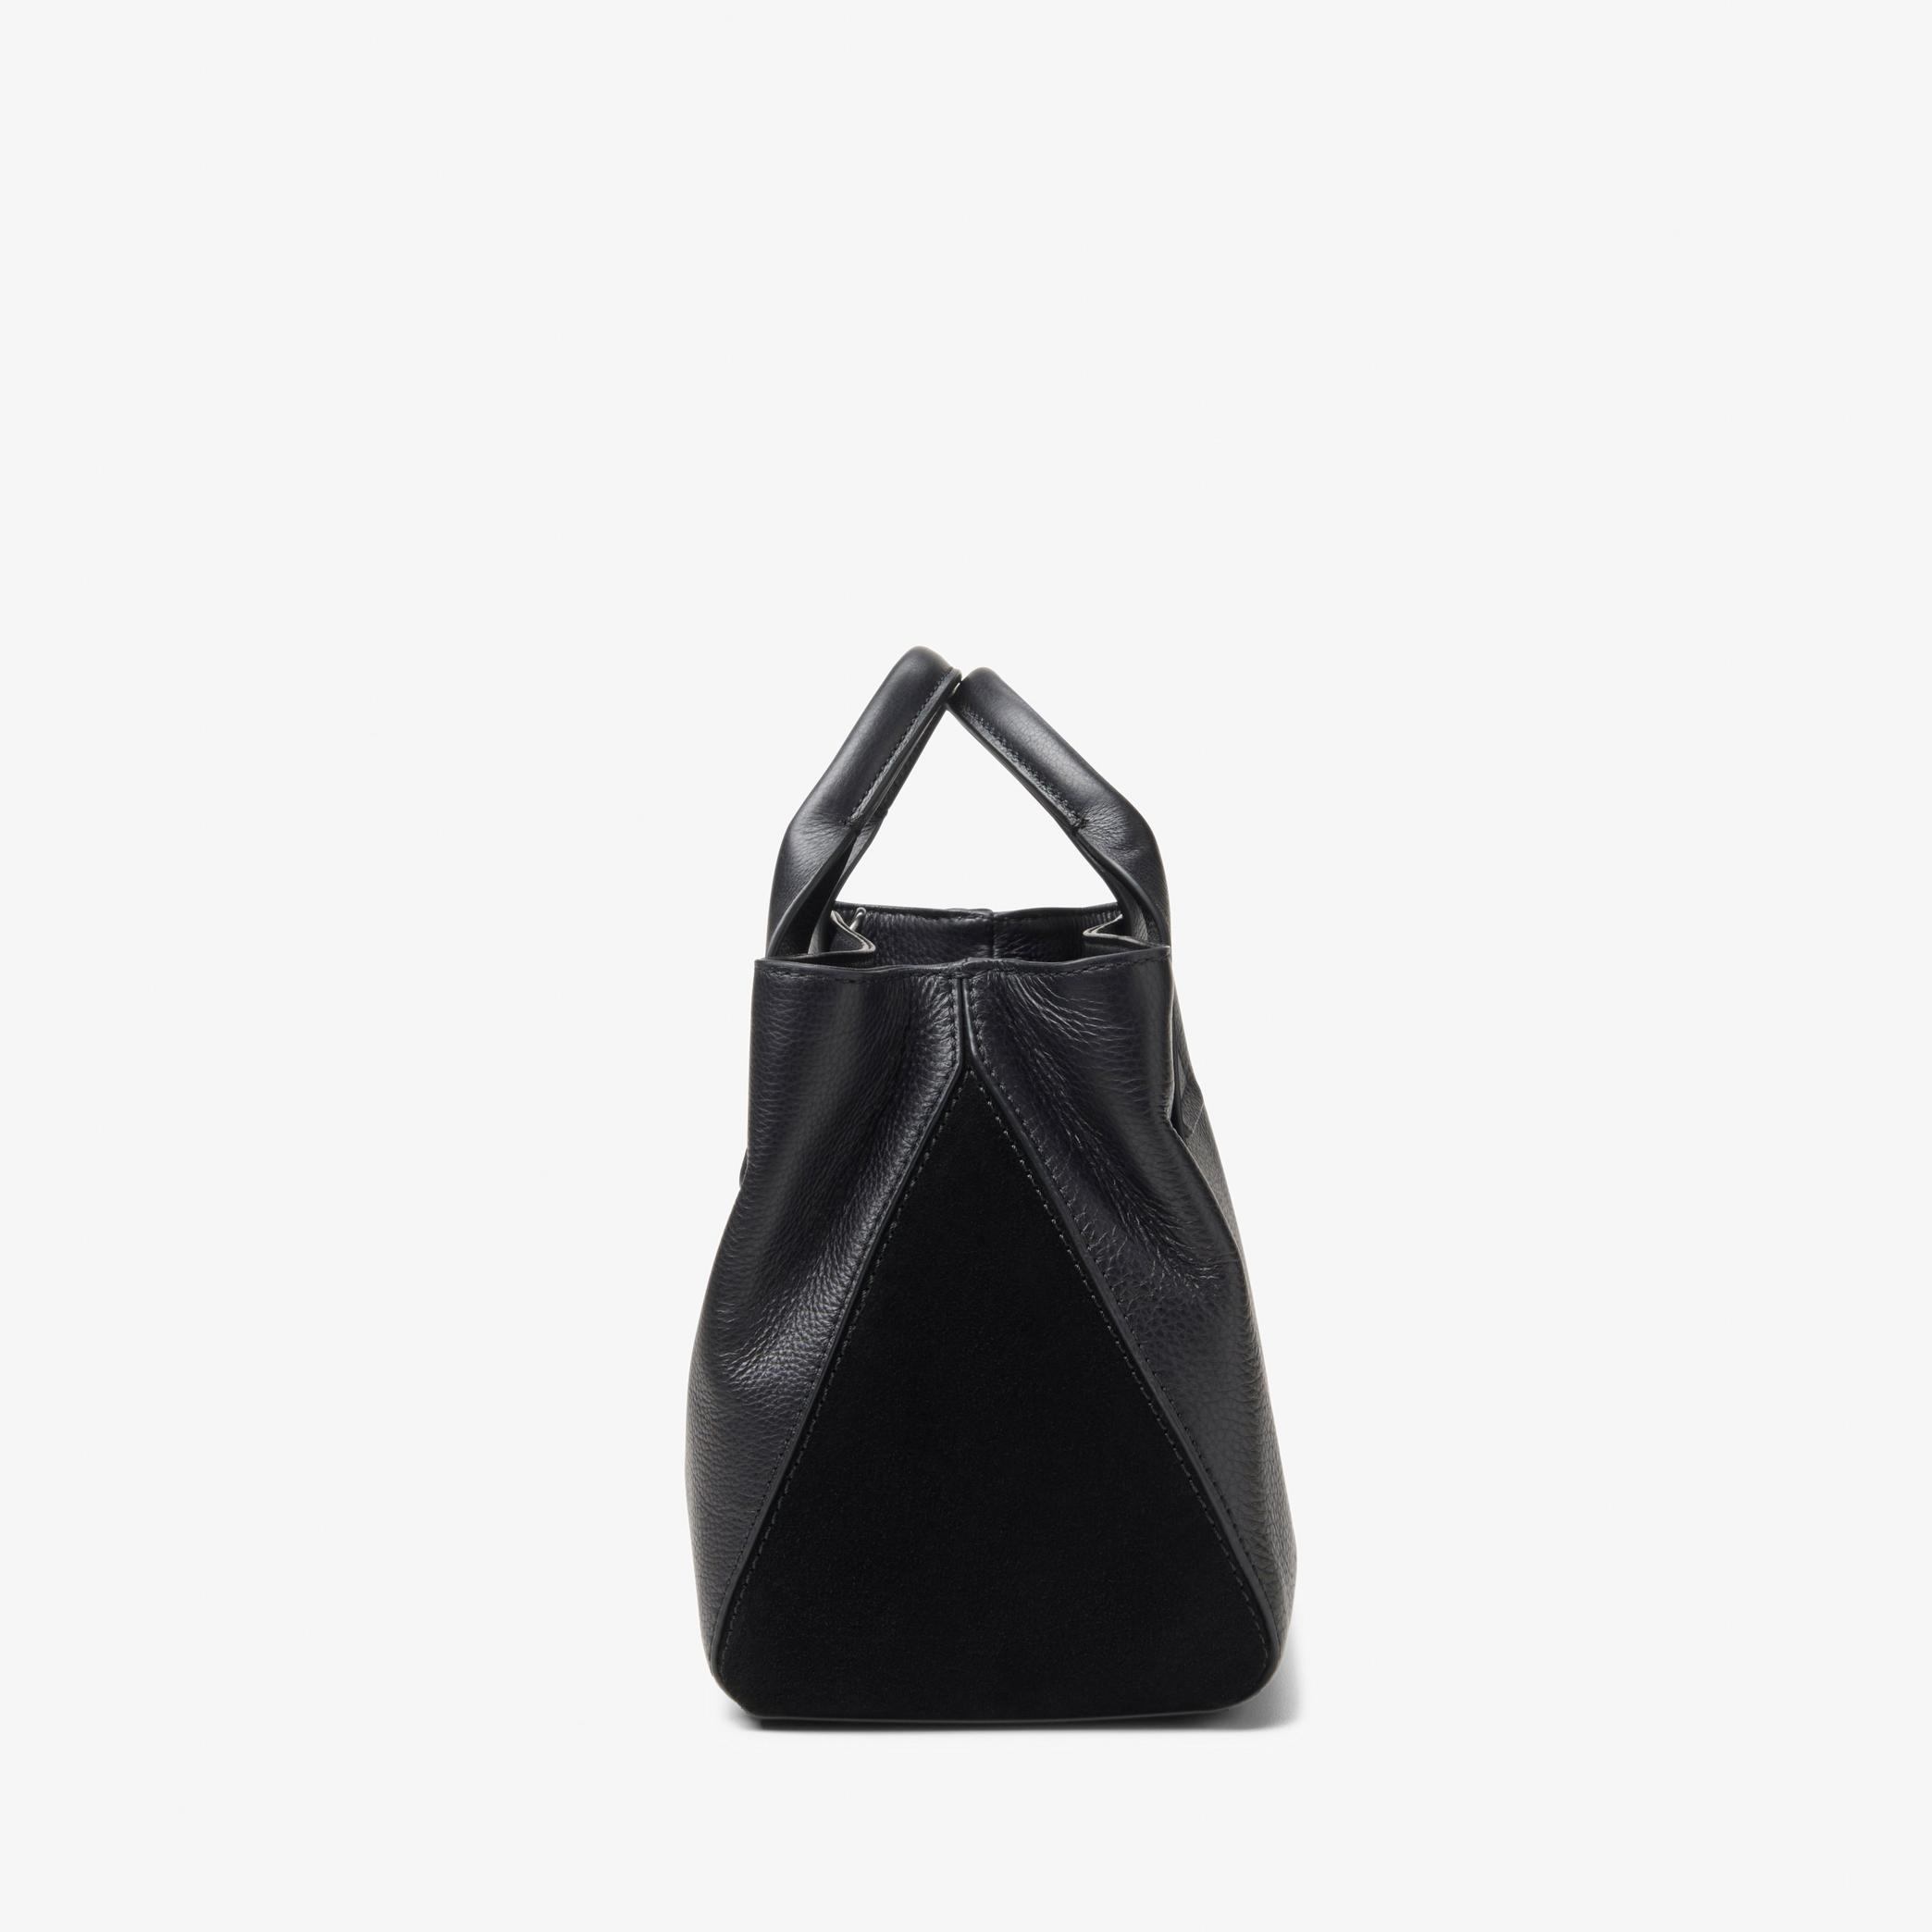 WOMENS The Pimsey Small Black Leather Tote Bag | Clarks Outlet